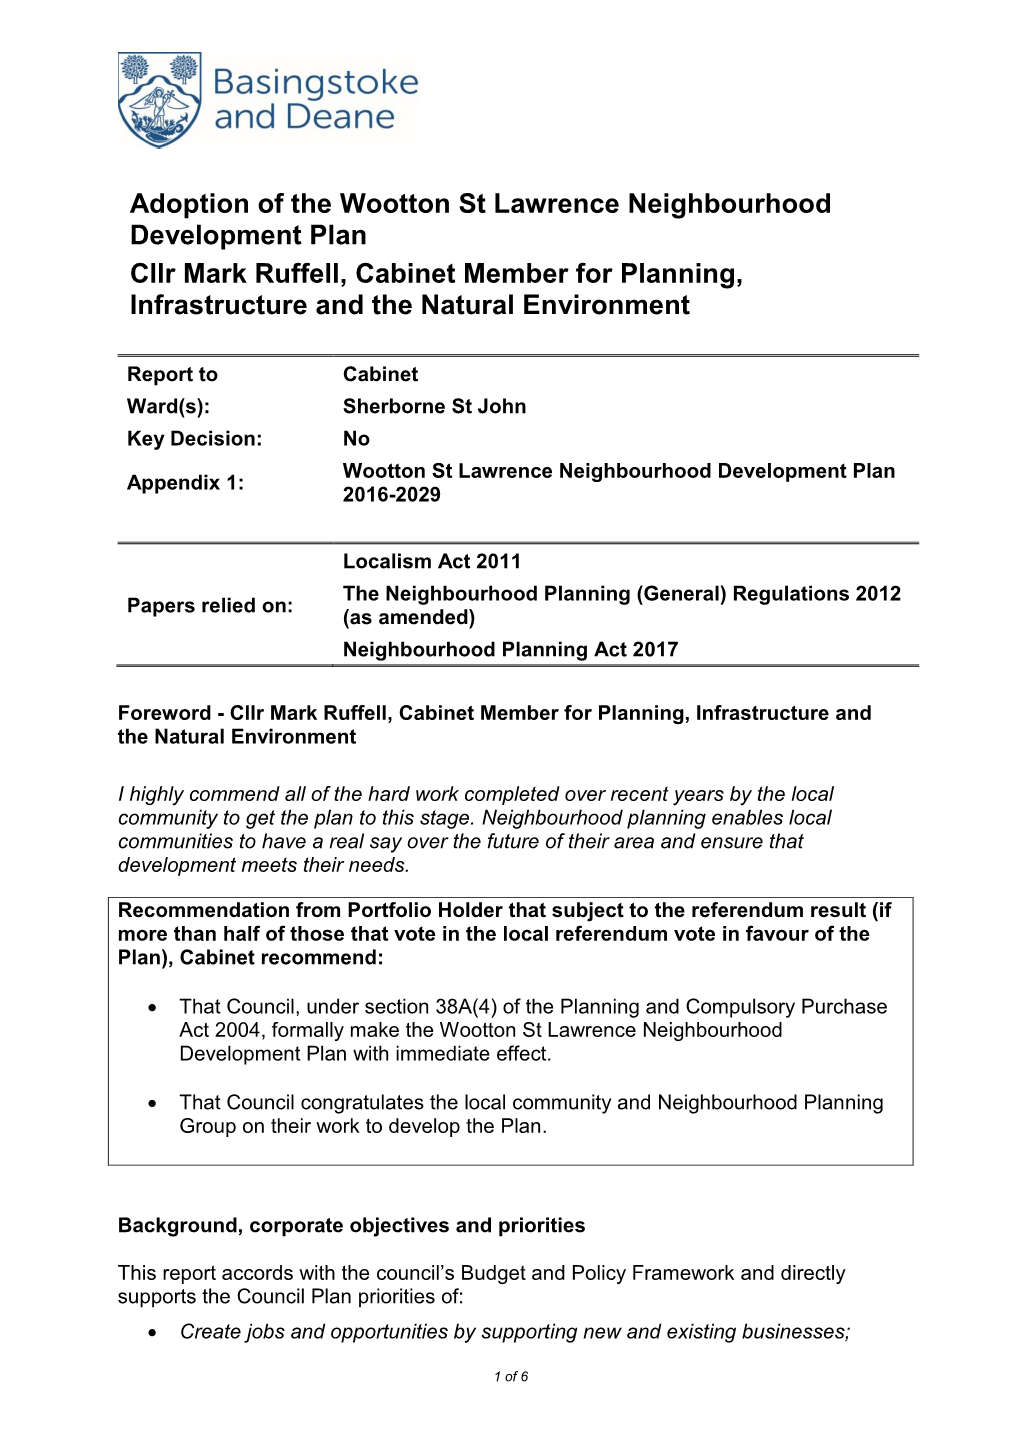 Adoption of the Wootton St Lawrence Neighbourhood Development Plan Cllr Mark Ruffell, Cabinet Member for Planning, Infrastructure and the Natural Environment